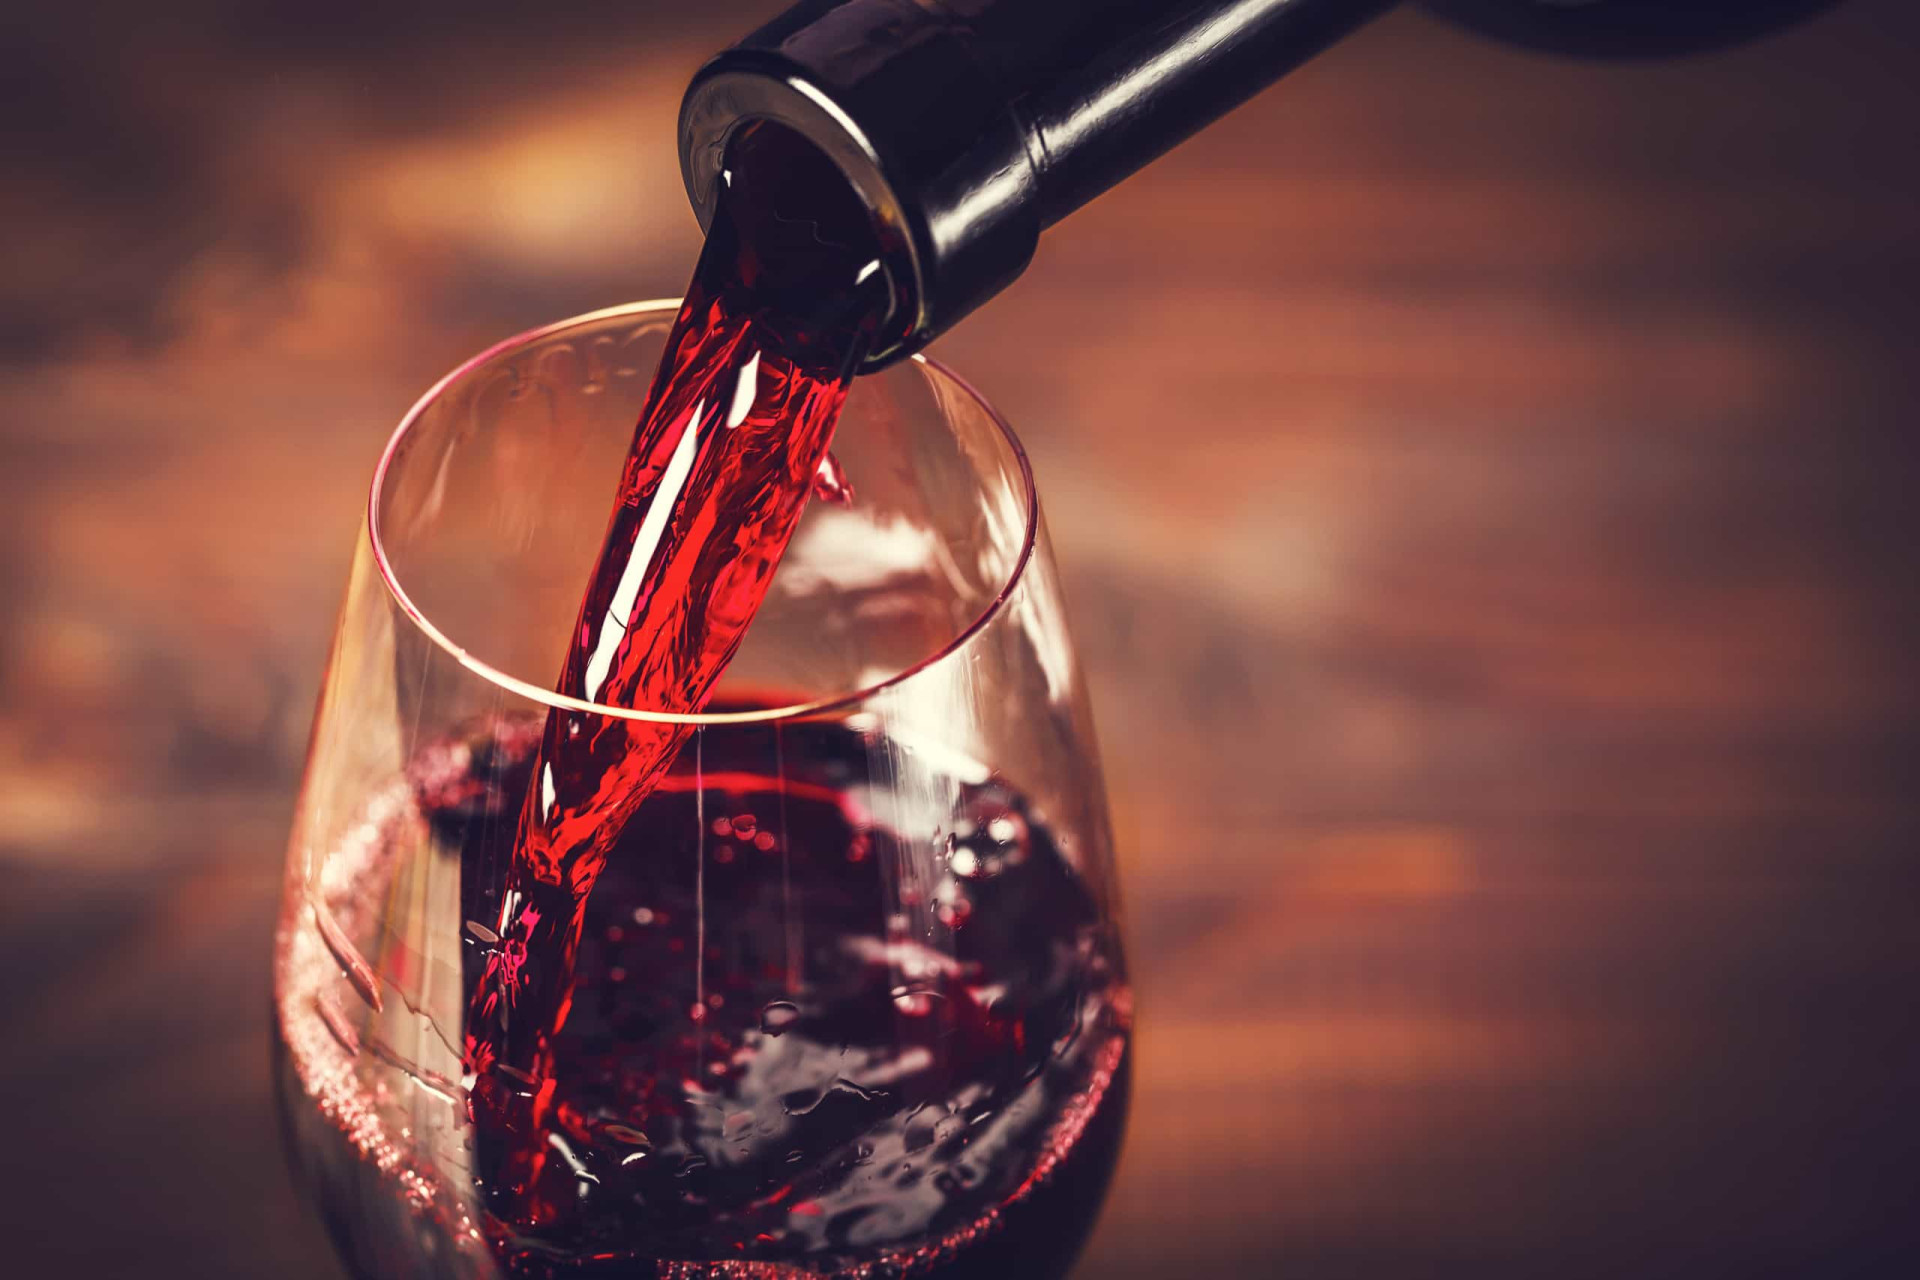 <p>"Of course, you could drink wine before going to the dentist, but it will affect [your] treatment. There will be some contraindications between the wine and some dental medication," explains dentist David Potts.</p><p><a href="https://www.msn.com/en-us/community/channel/vid-7xx8mnucu55yw63we9va2gwr7uihbxwc68fxqp25x6tg4ftibpra?cvid=94631541bc0f4f89bfd59158d696ad7e">Follow us and access great exclusive content every day</a></p>